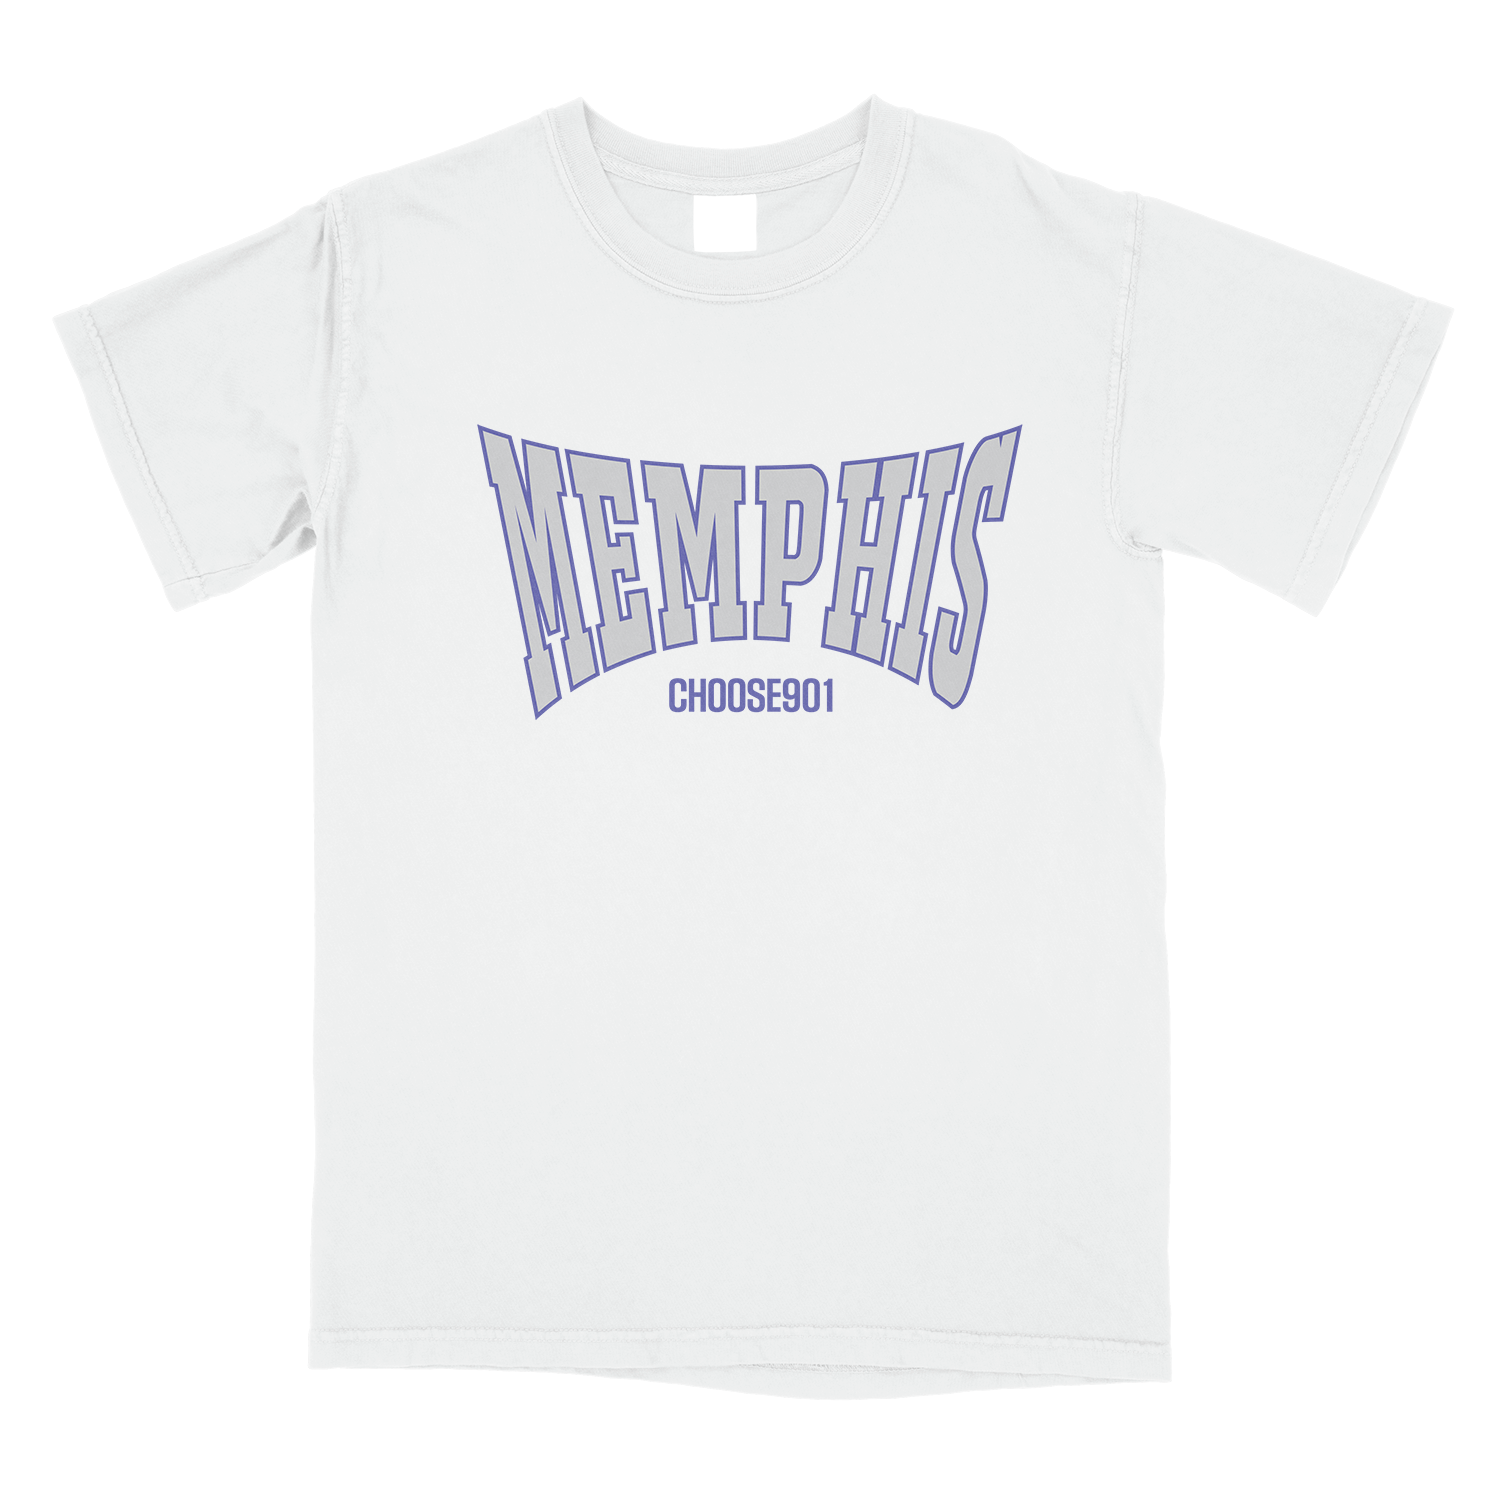 Cool Grey Memphis College Letter Shirt from Choose901 has the word "Memphis" in large blue letters above the phrase "Choose901".